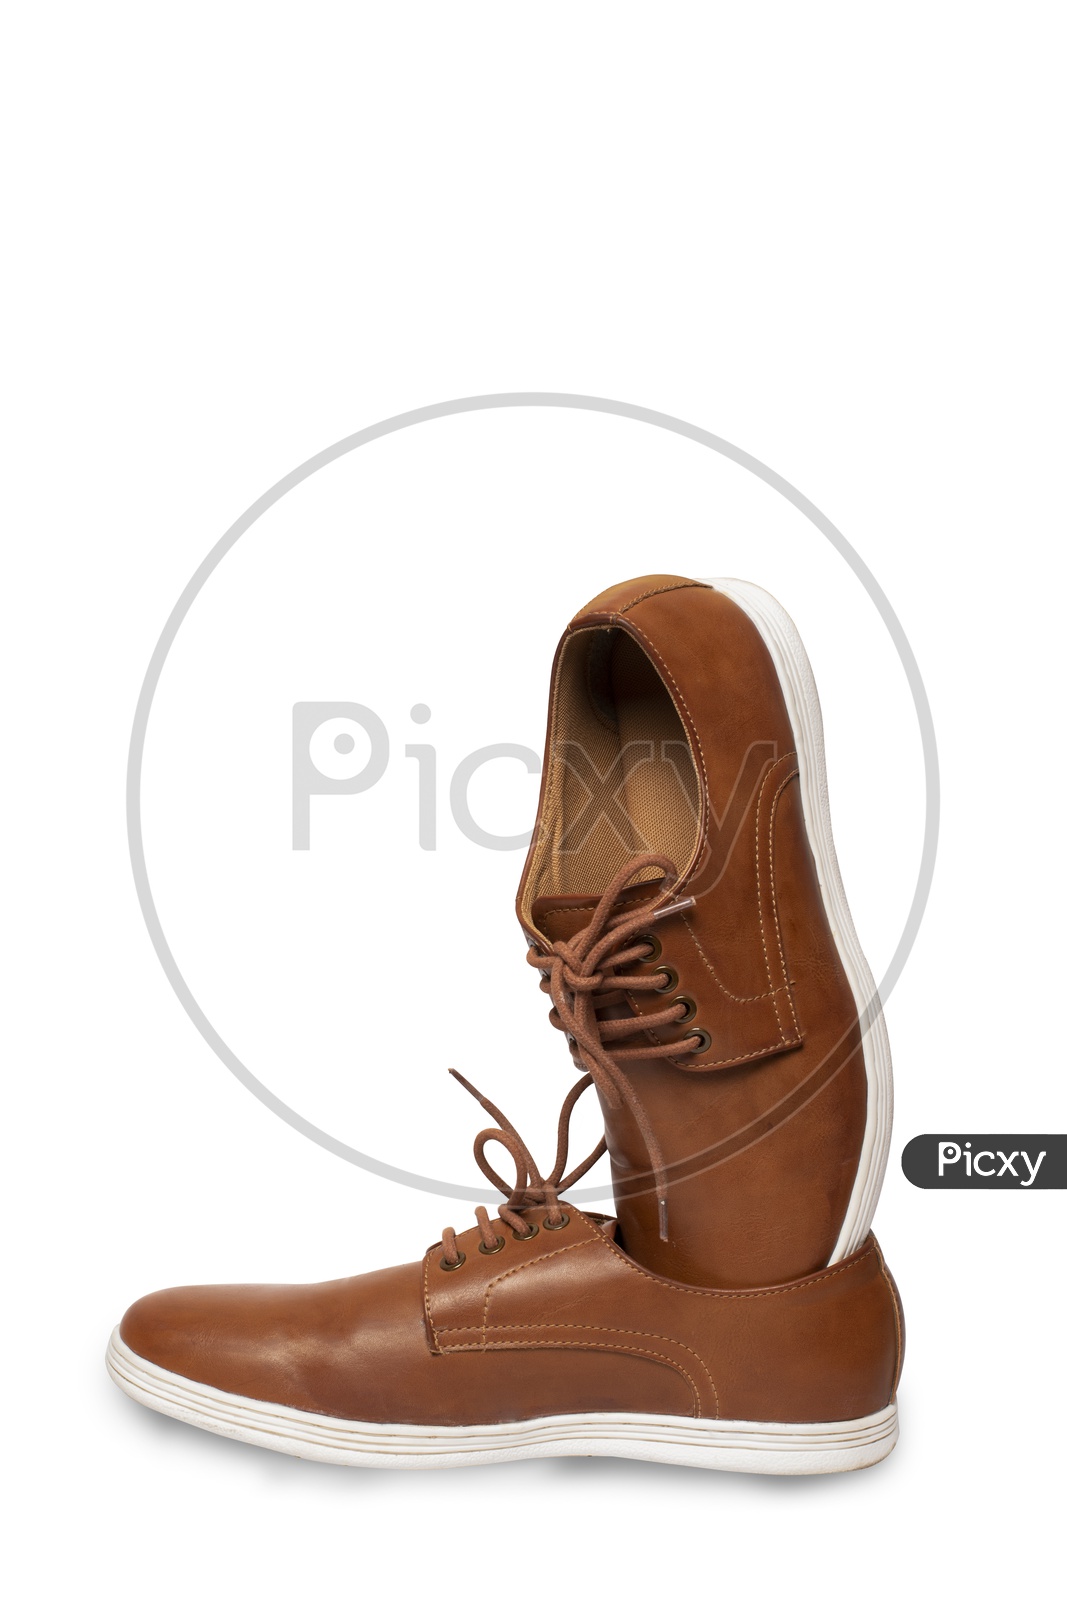 BROWN SHOES || PRODUCT PHOTOGRAPHY